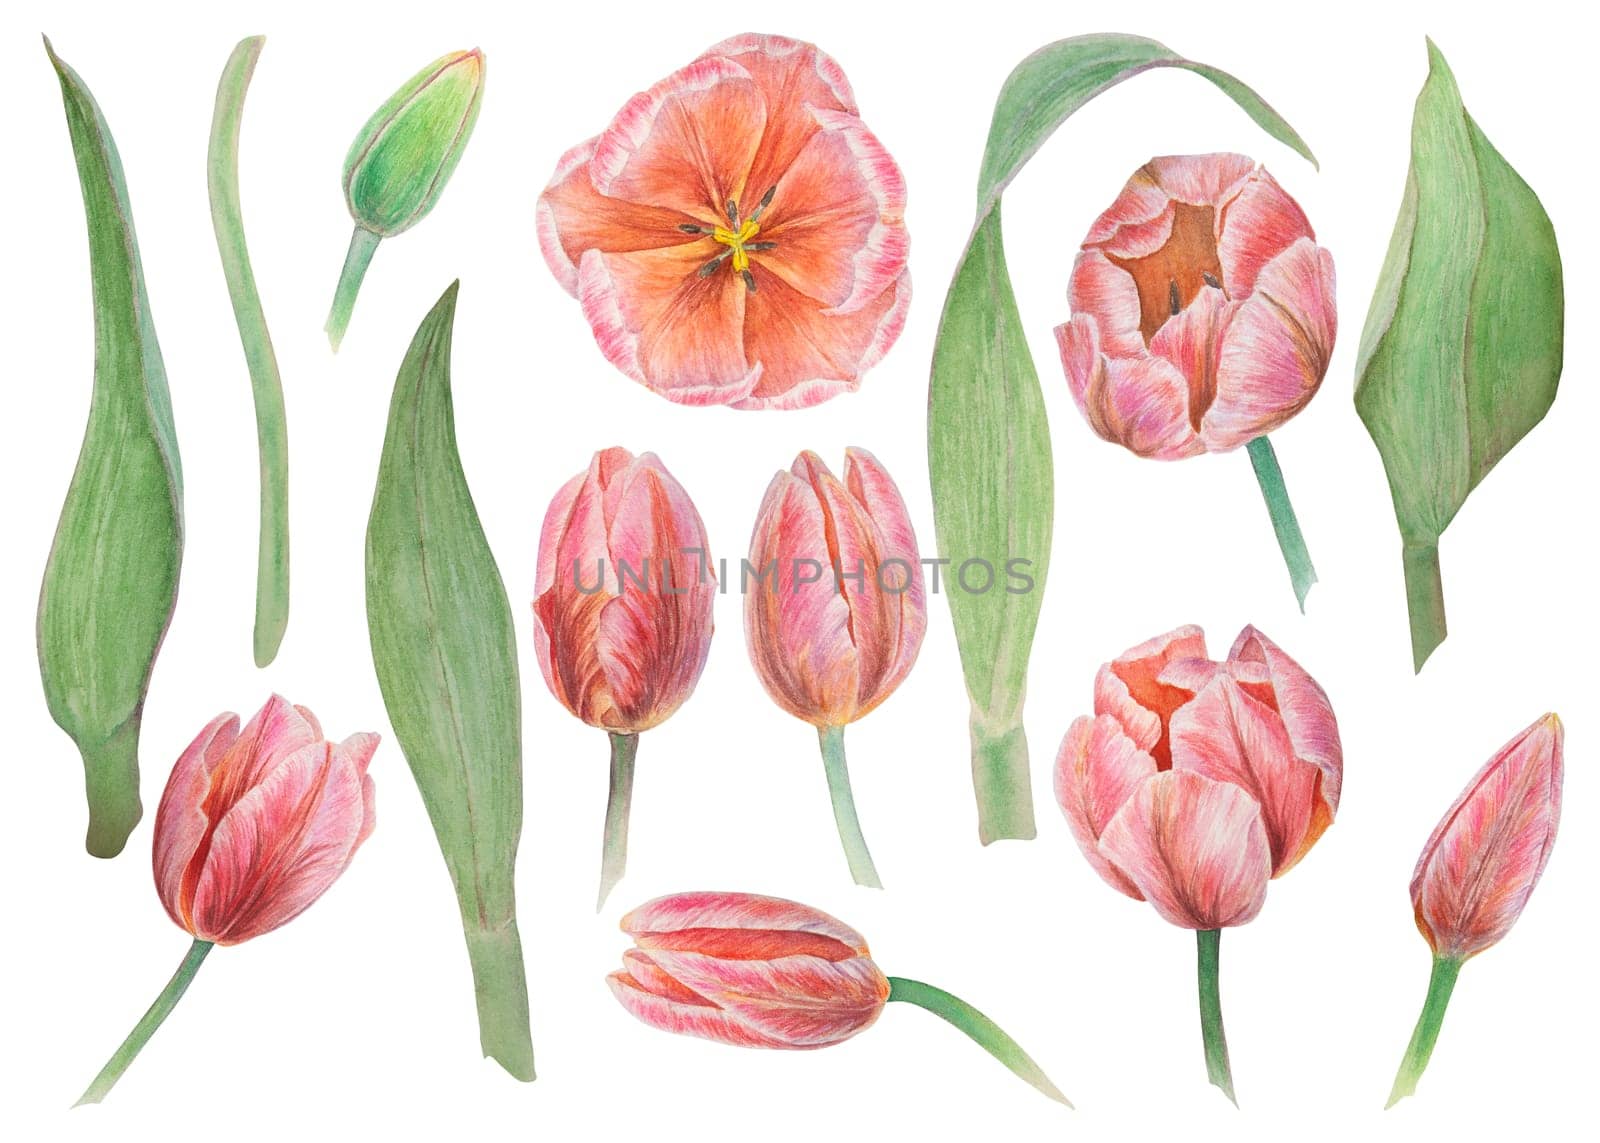 Set of pink tulips elements painted in watercolor, realistic botanical hand drawn illustration isolated on white background for design, wedding print products, paper, invitations, cards, fabric by florainlove_art